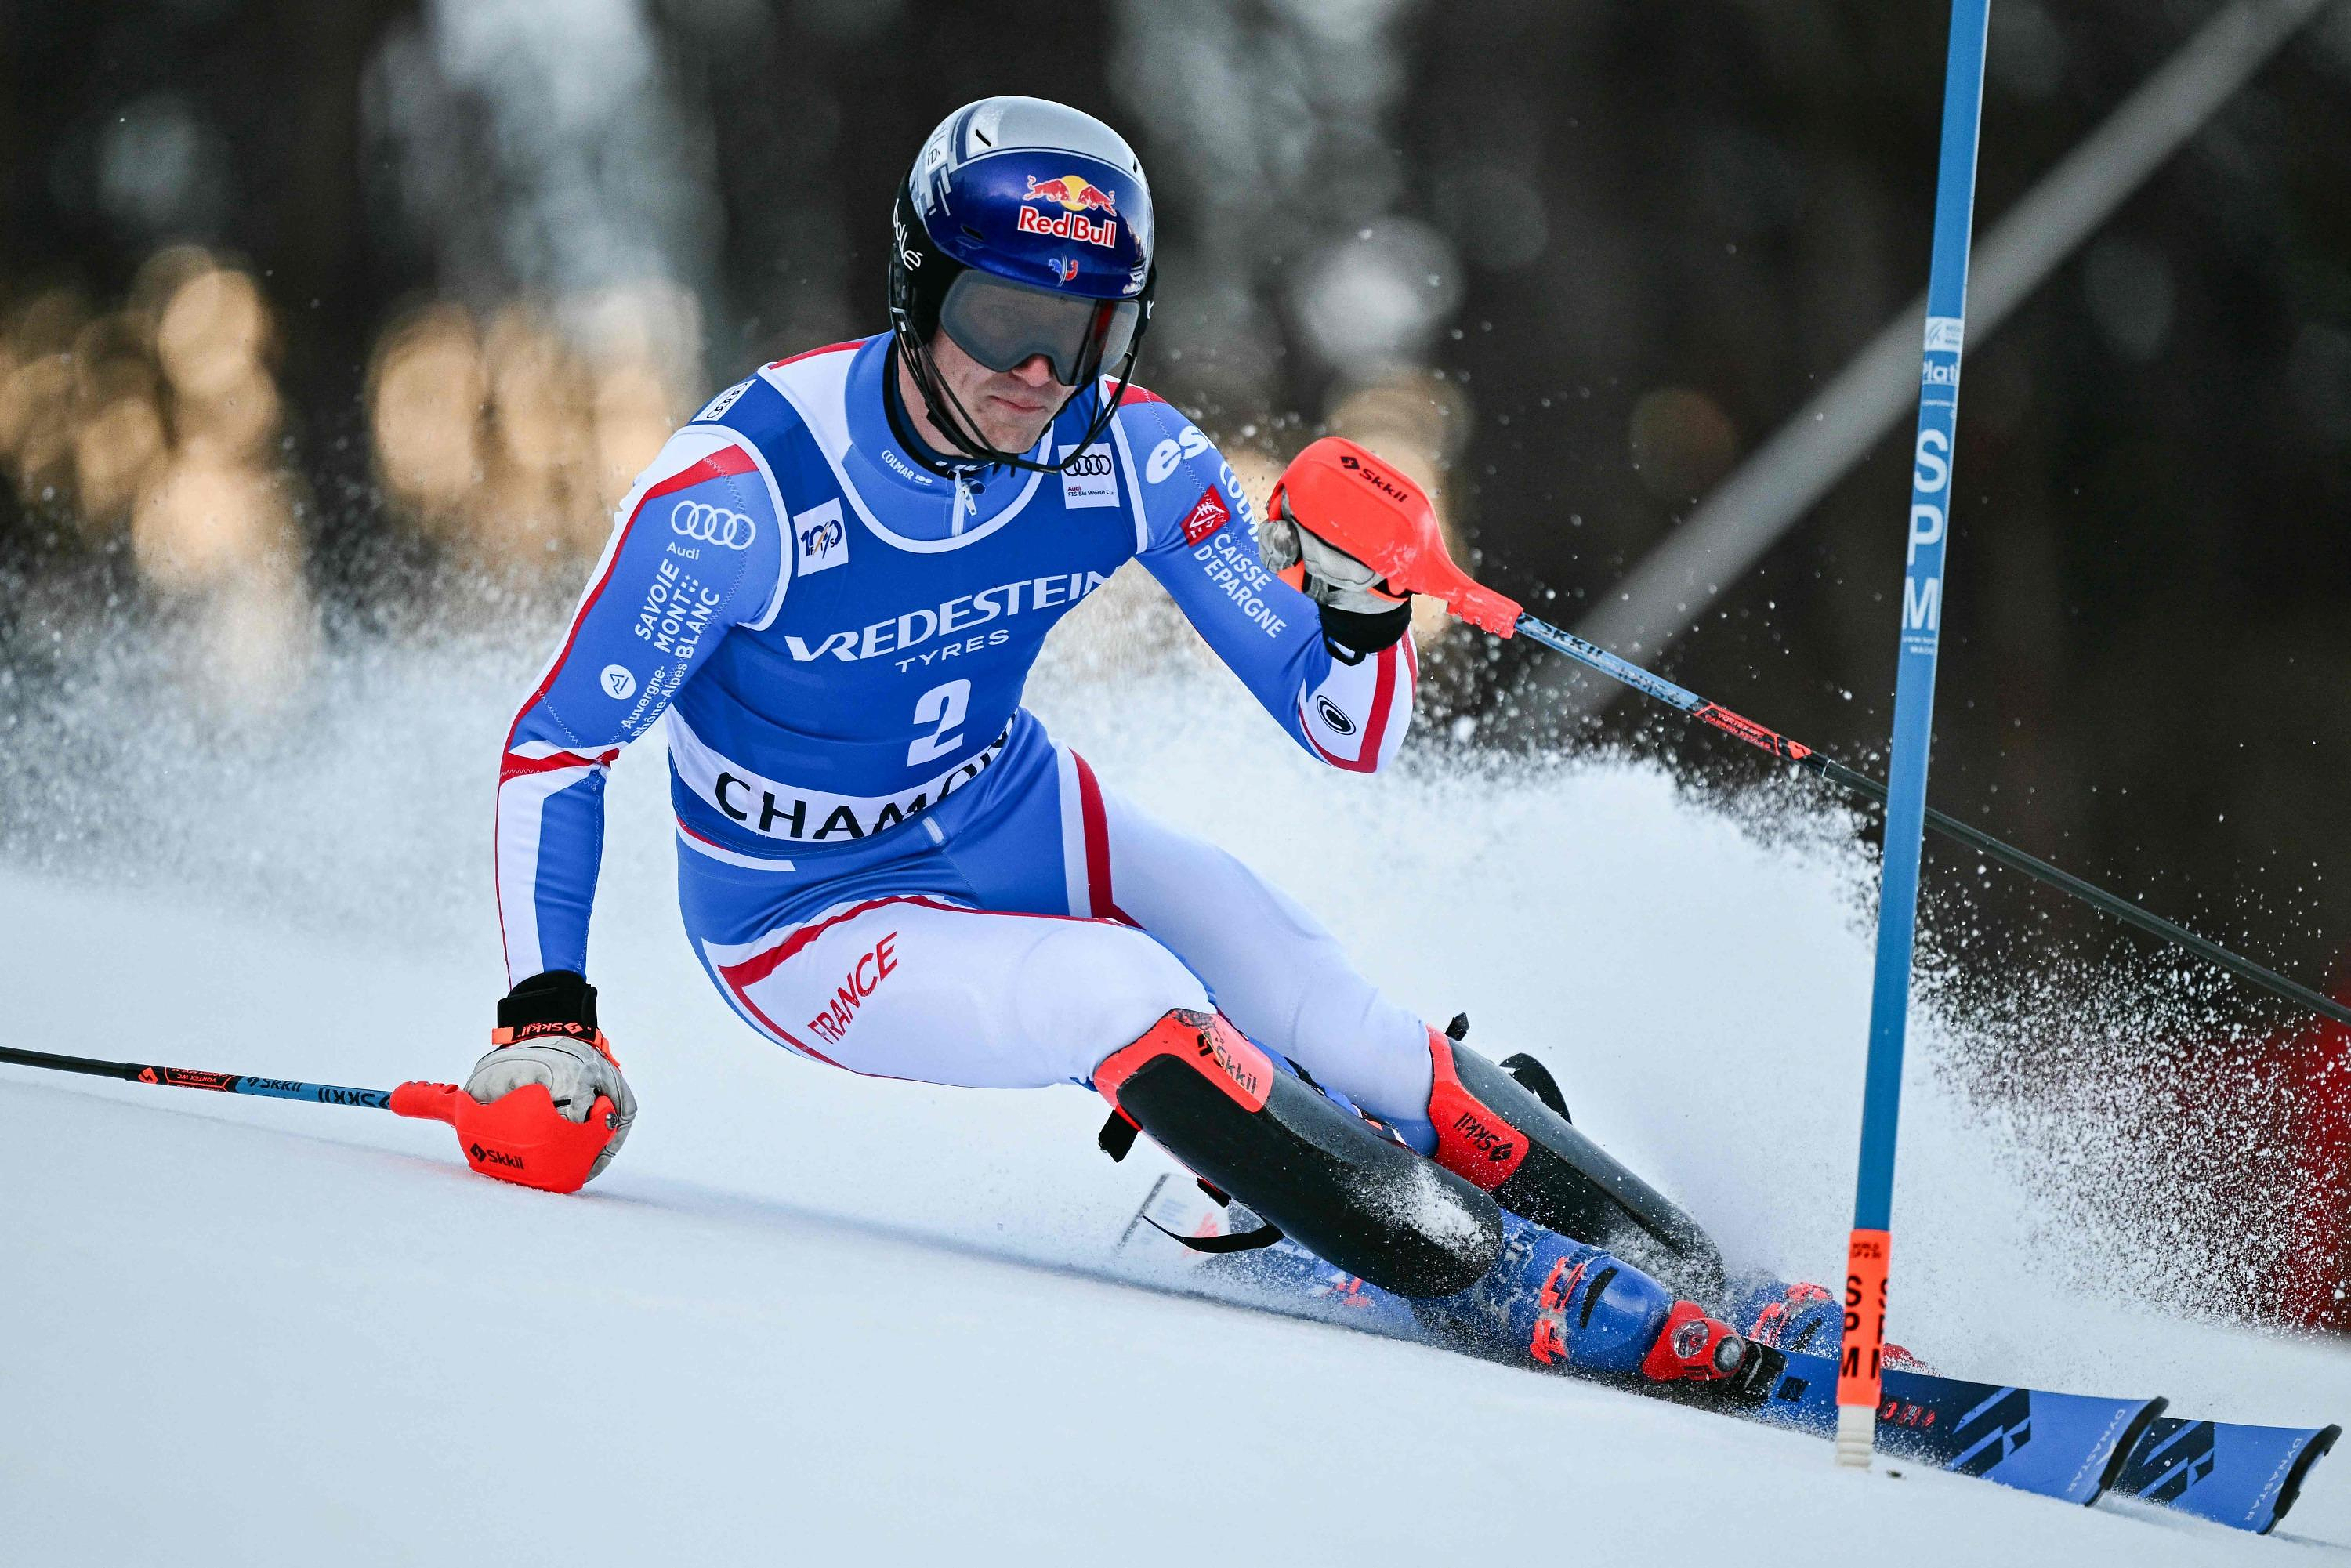 Skiing: disappointment for Clément Noël, 3rd in the Chamonix slalom